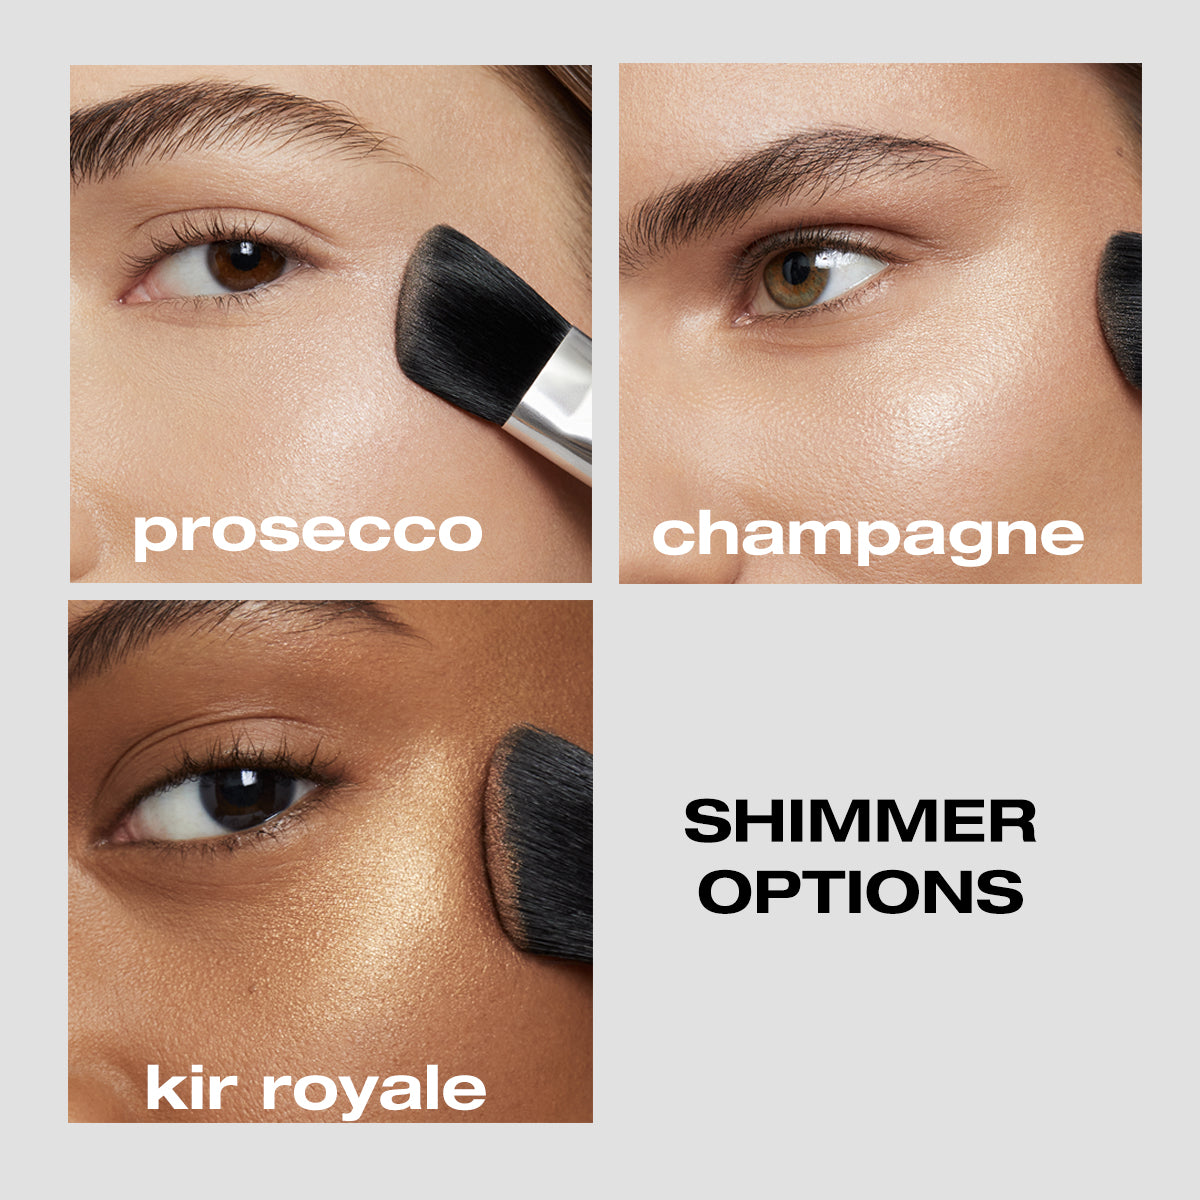 Shimmer options: prosecco, champagne, kir royale